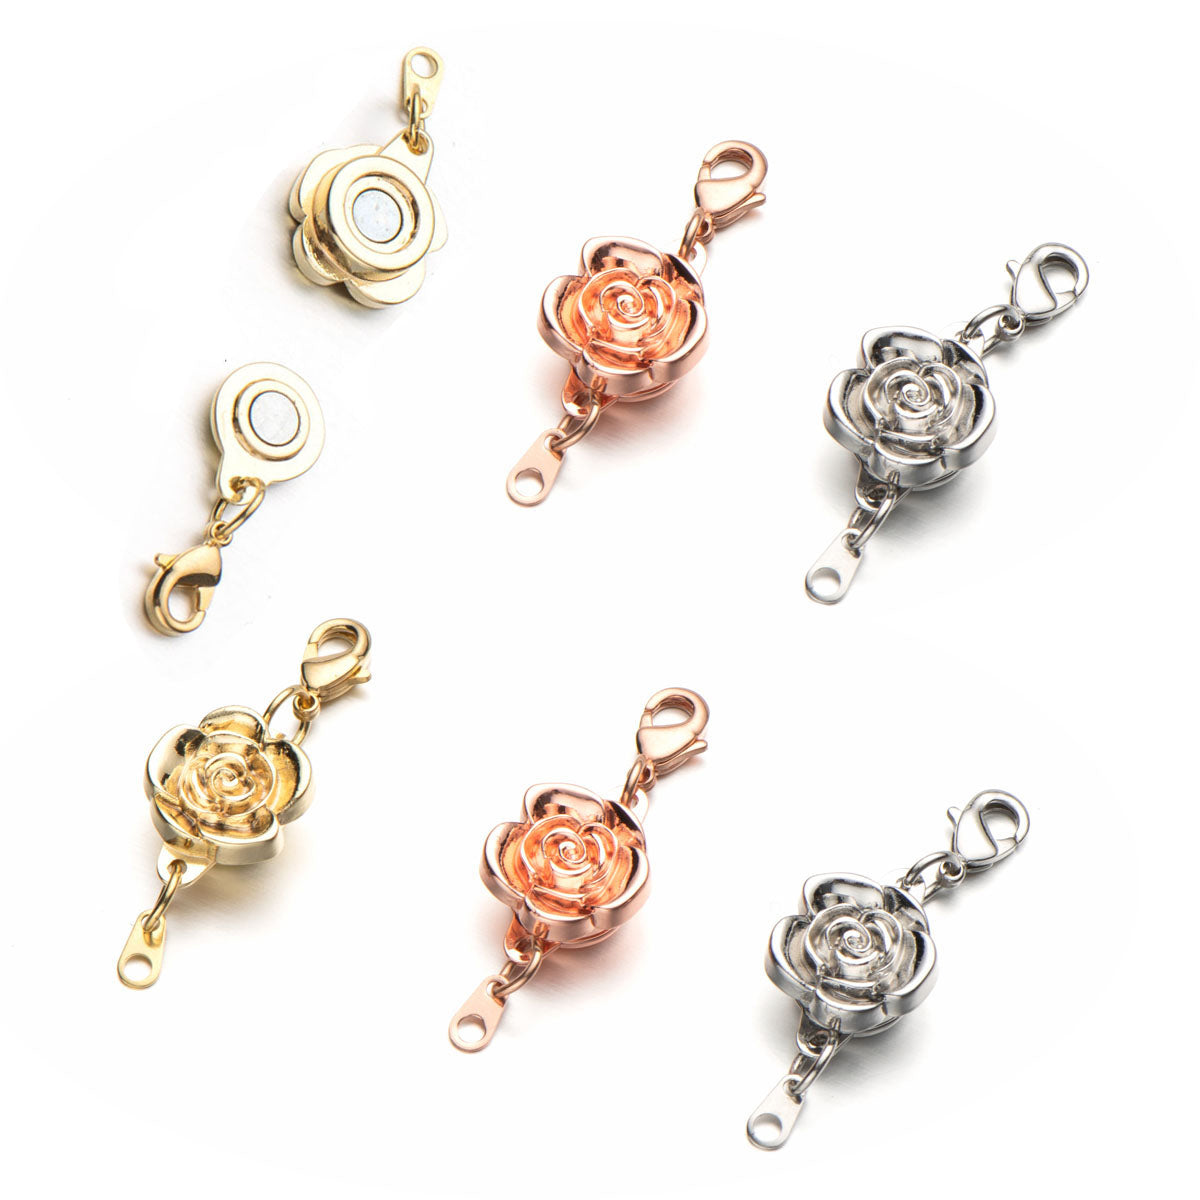 Double Opening Interchangeable Infinity Repair Pendant Bail Clasp